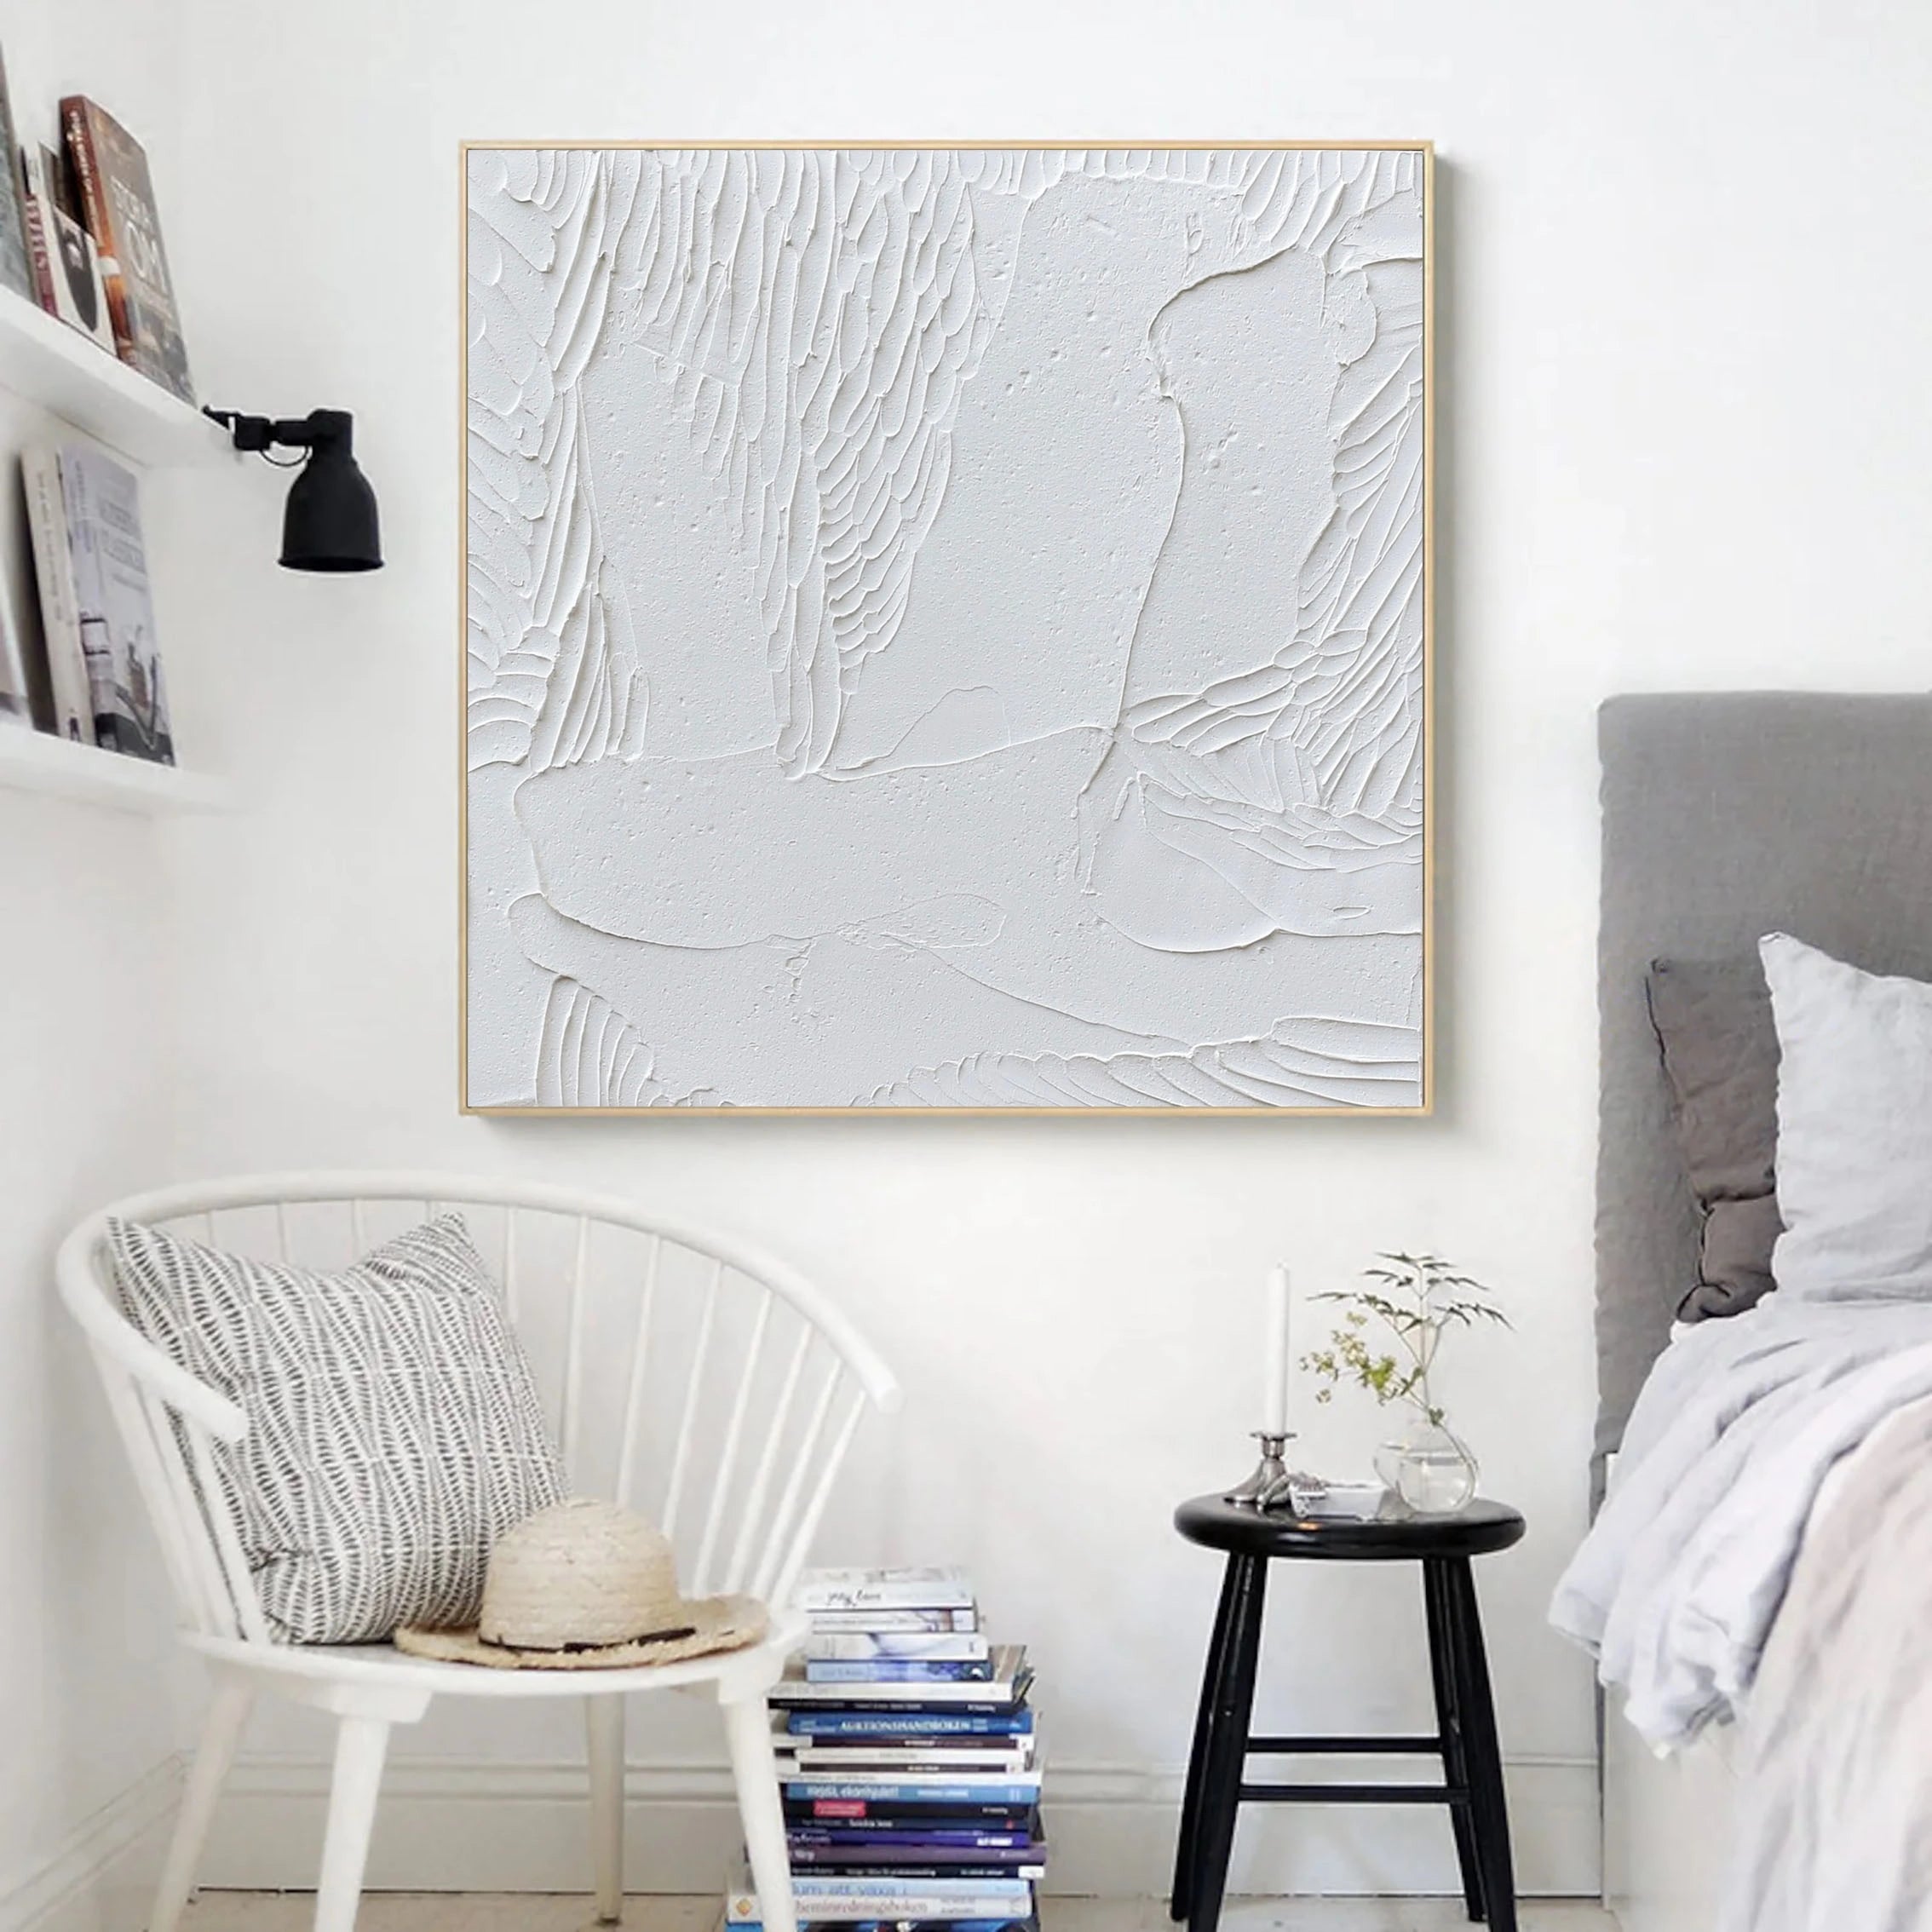 3D Textured White Plaster Art Wall Decor Painting on Canvas